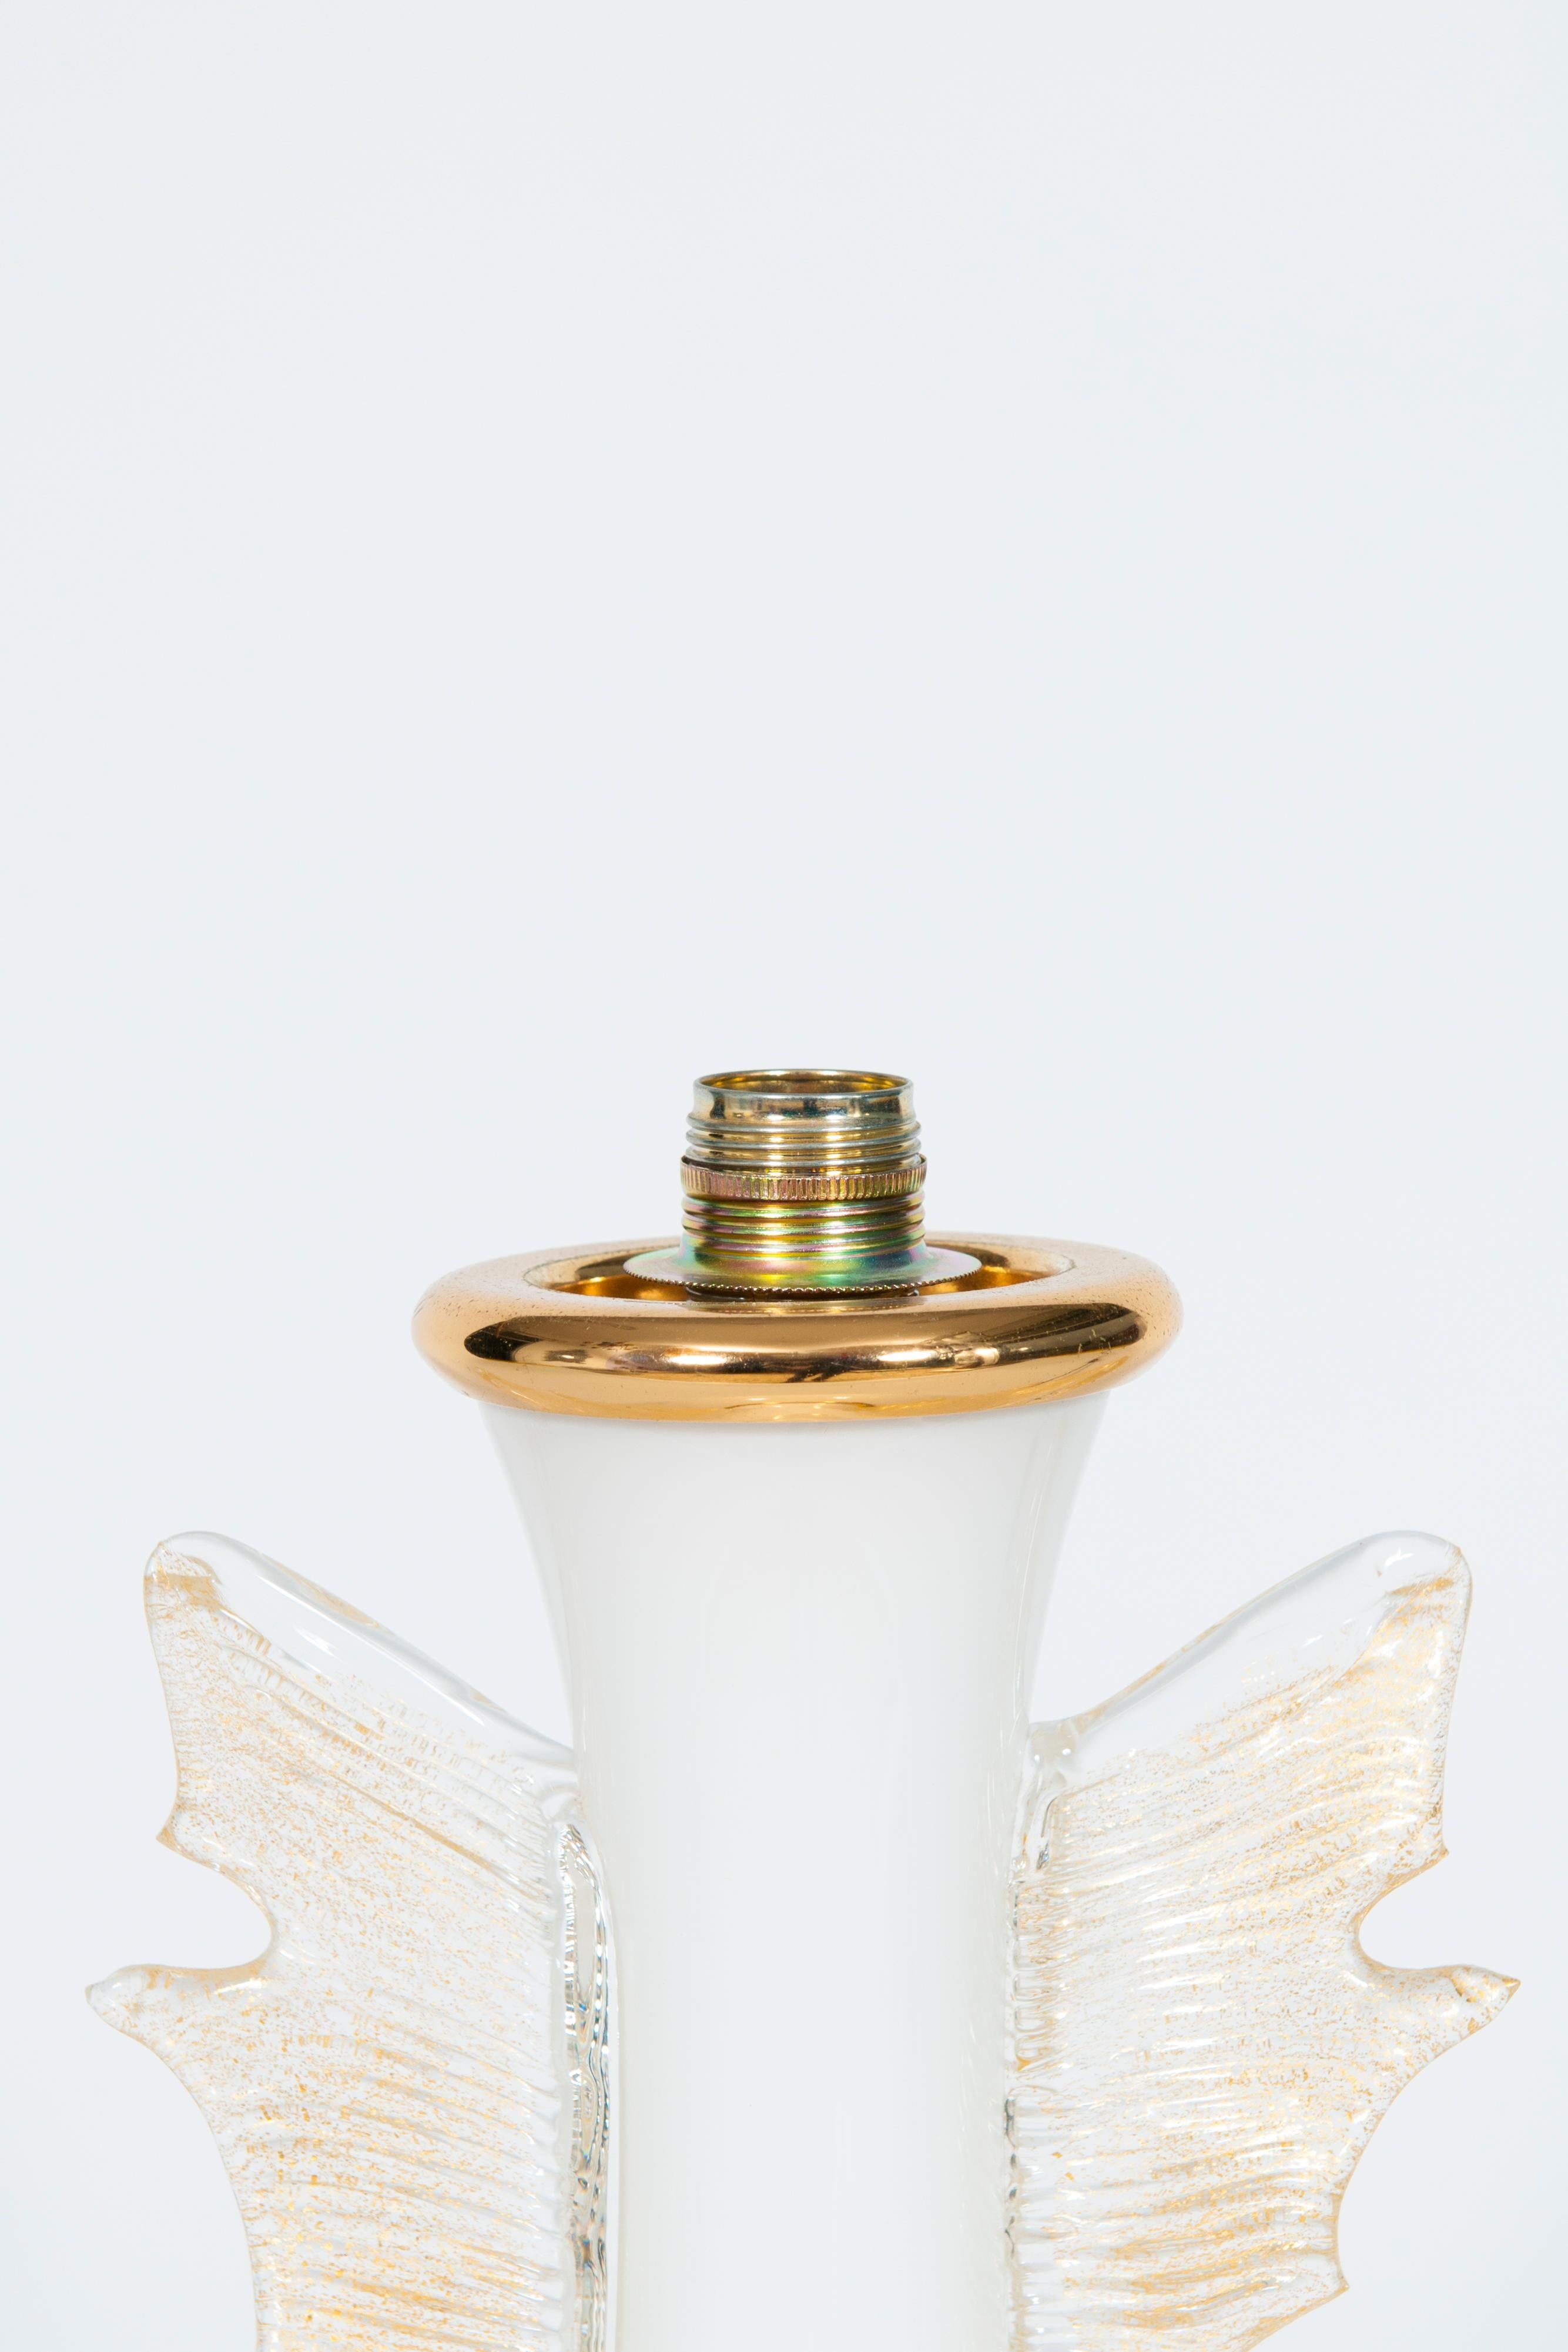 Elegant Gold Wings Table Lamps in blown Murano Glass, 1970s Italy  For Sale 9